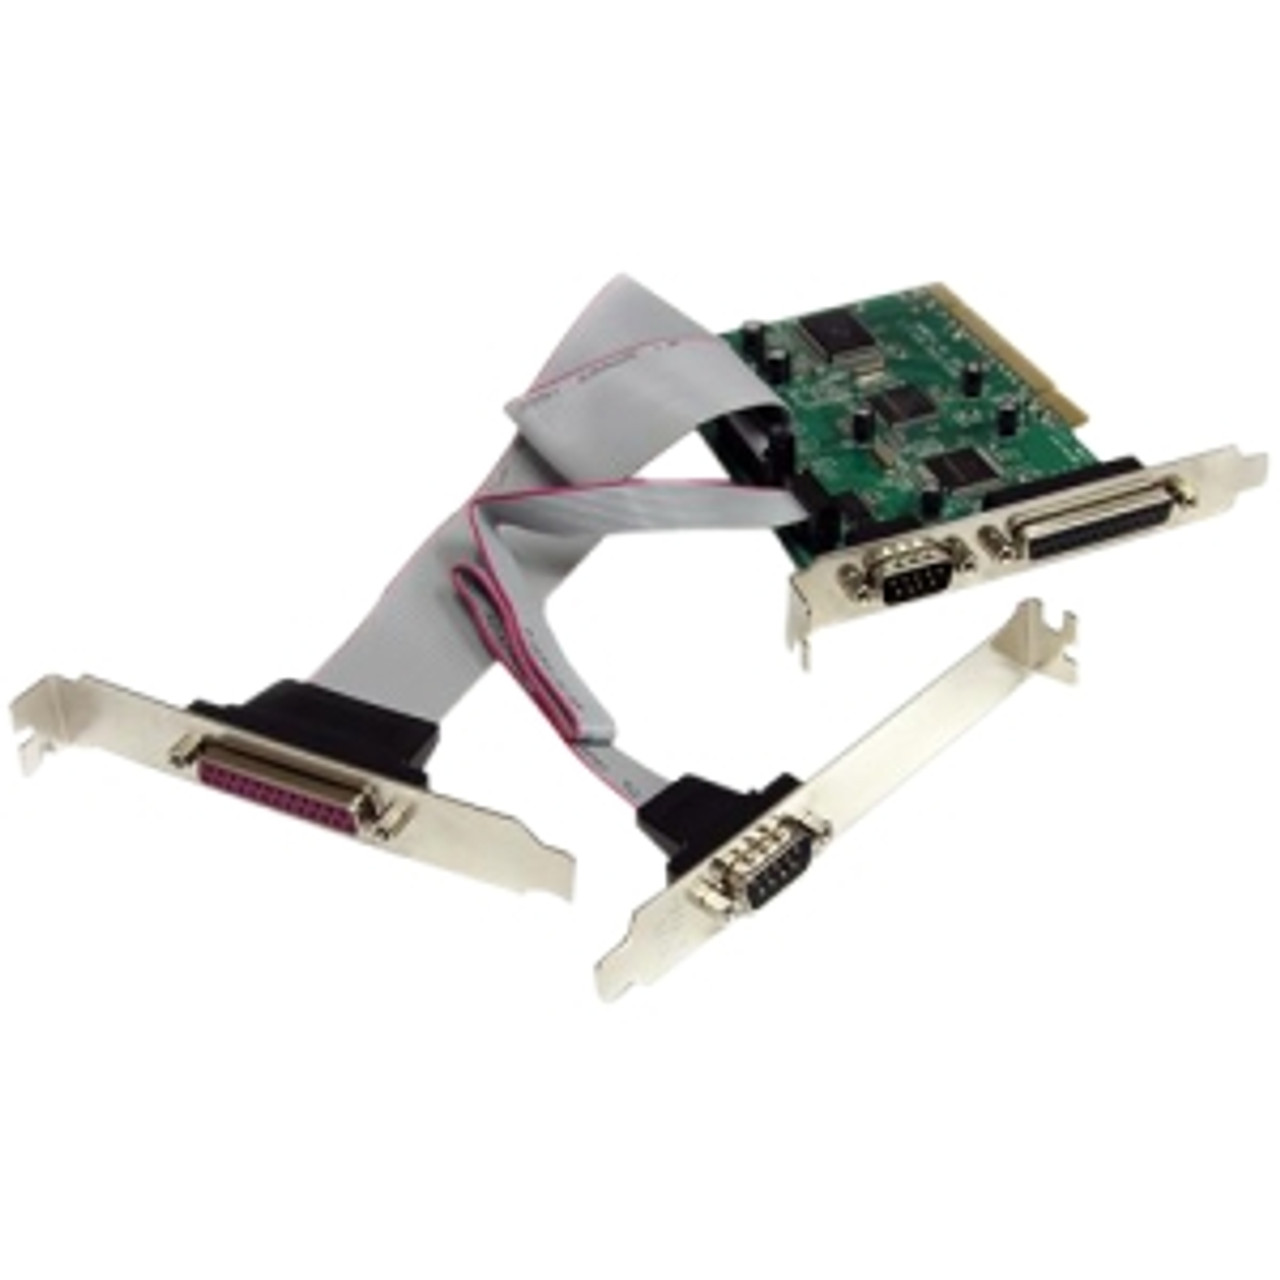 PCI2S2PMC StarTech 2-Port DB-9 RS-232 PCI Serial Parallel Combo Card with 16C1050 UART